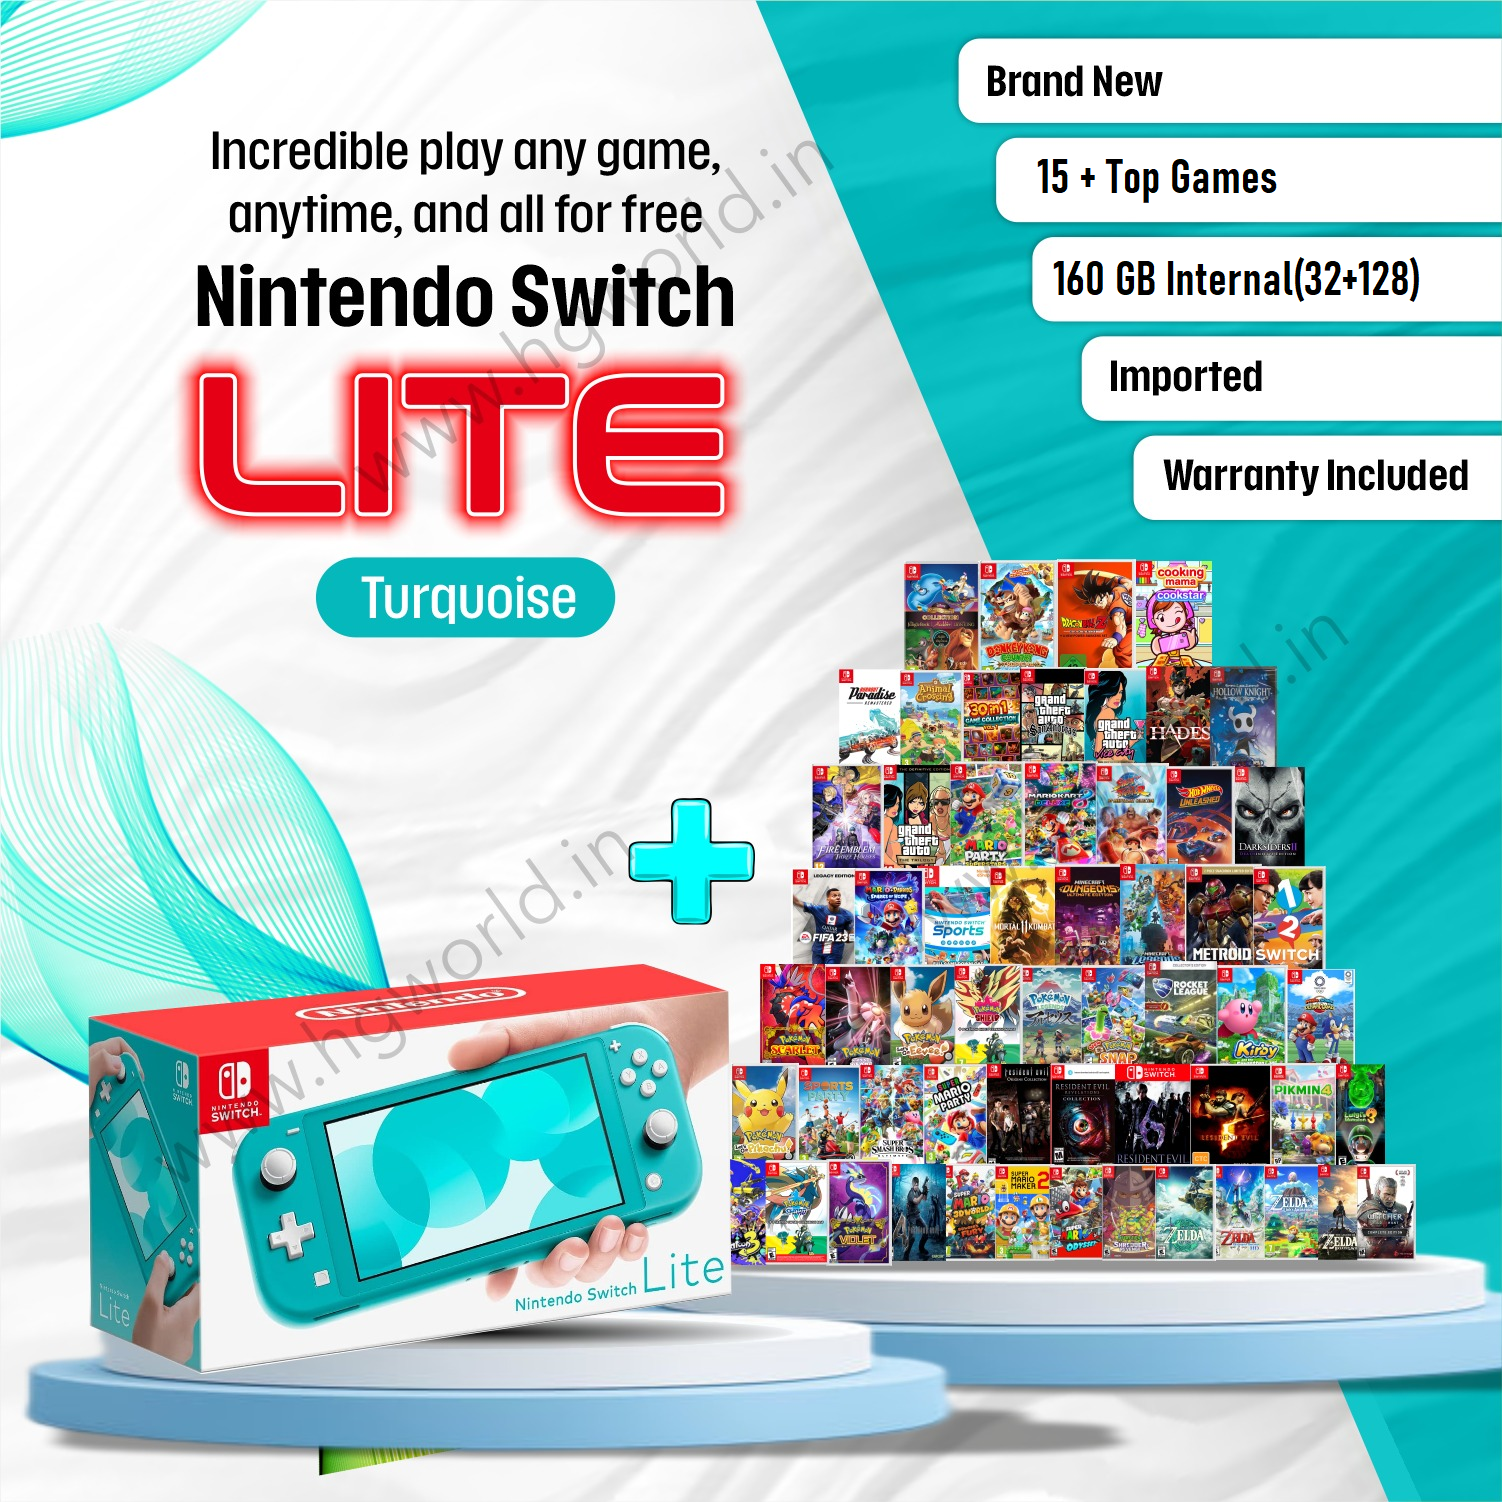 Brand New NINTENDO Switch Lite | 15+ Best Games Bundle | 160 GB  Internal(32+128) | Turquoise Edition | Handheld Portable Gaming Console |  All Standard 